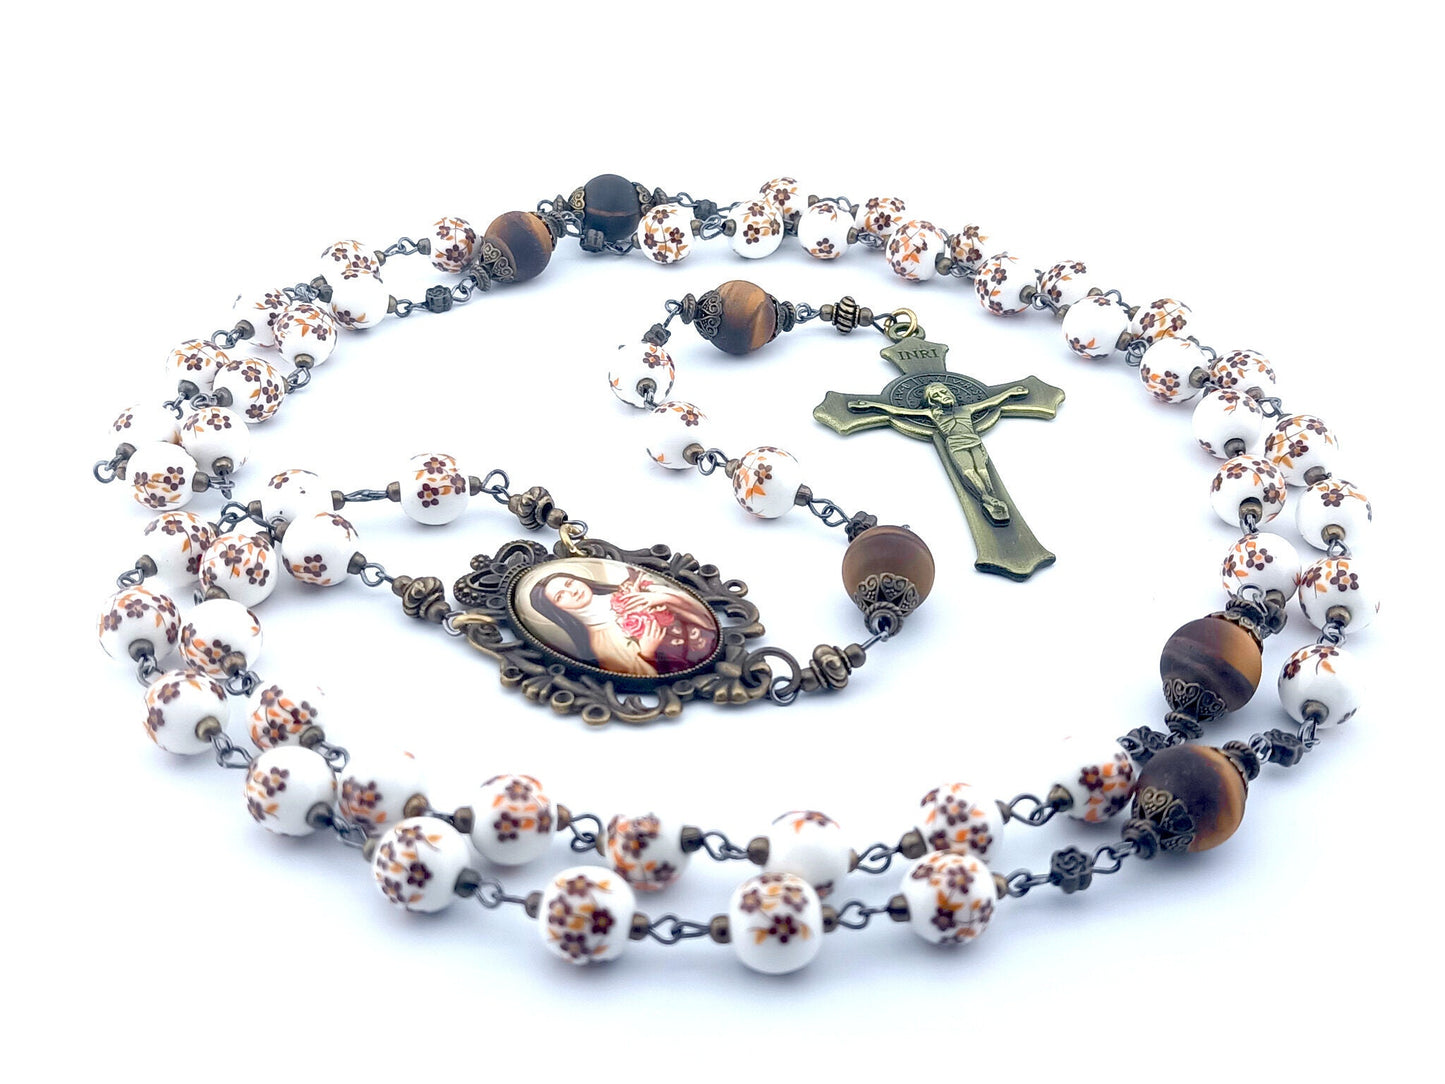 Saint Therese of Lisieux unique rosary beads with porcelain and tigers eye beads, bronze crucifix and picture centre medal.